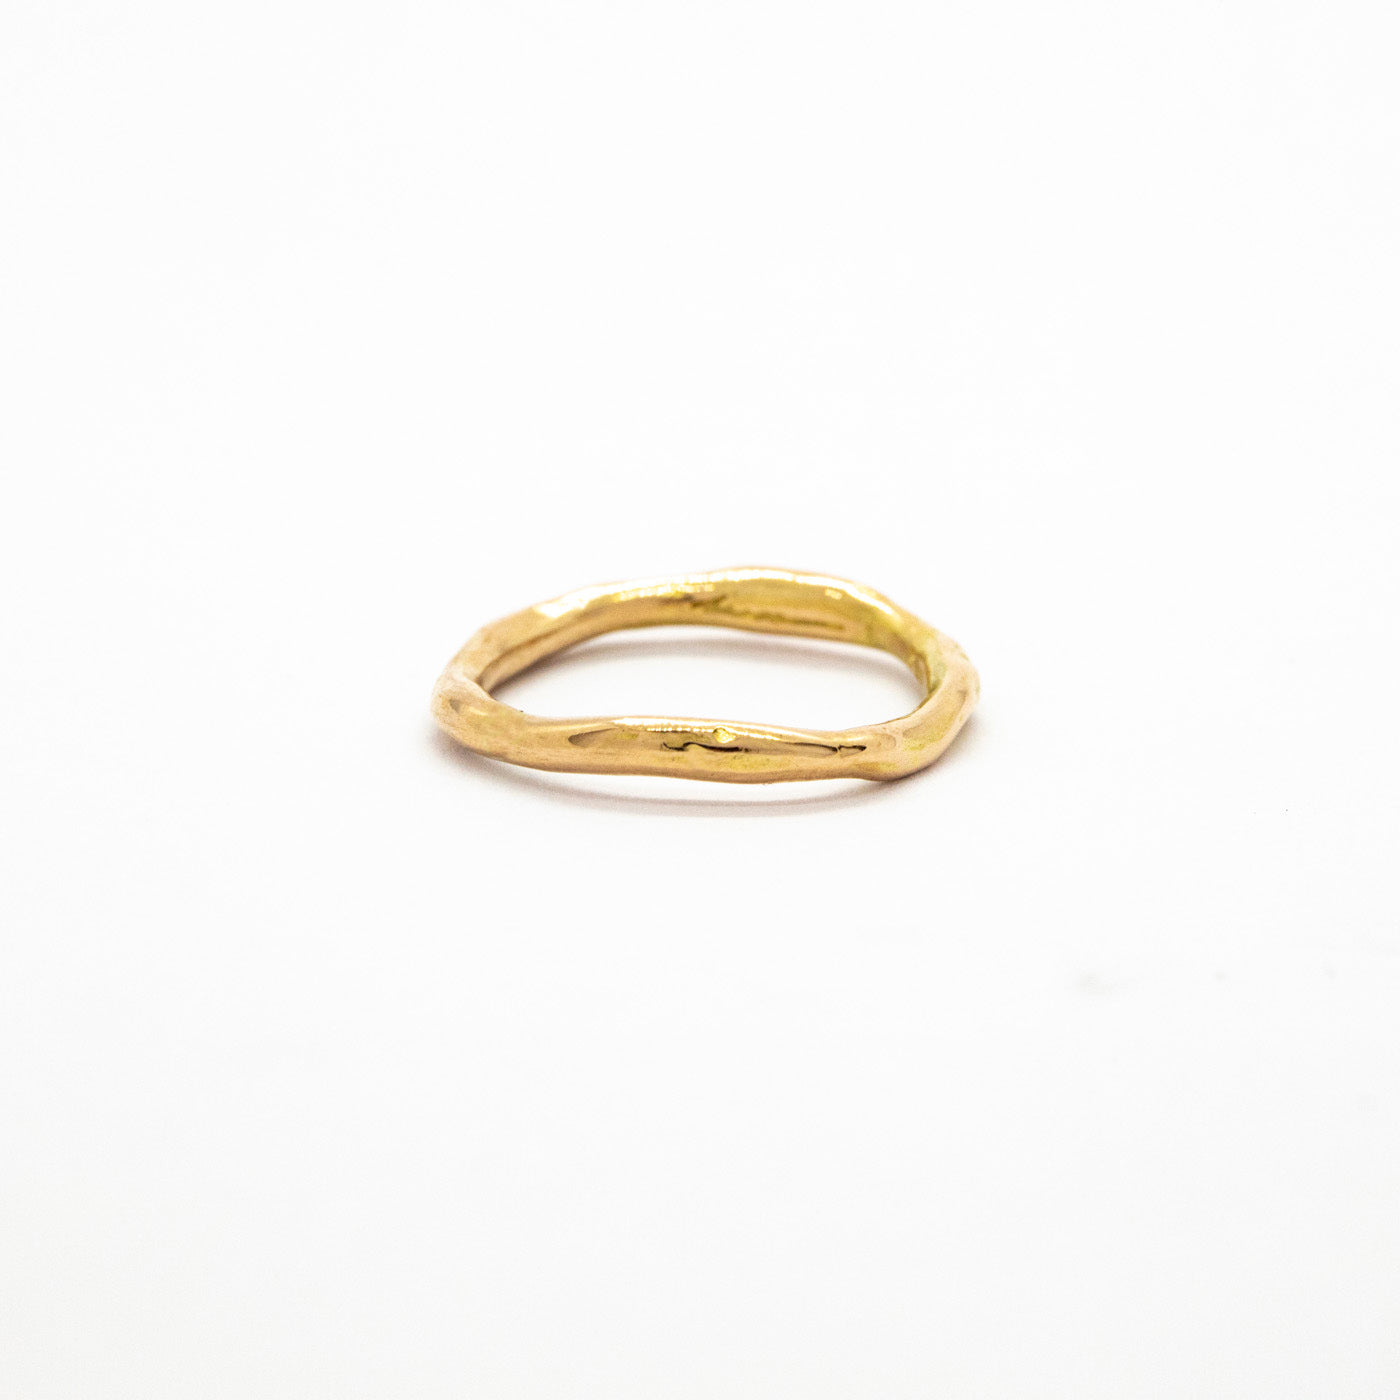 Ring Erato Wedding Band for Him 14ct or 18ct rose gold product view innan jewellery independent atelier berlin